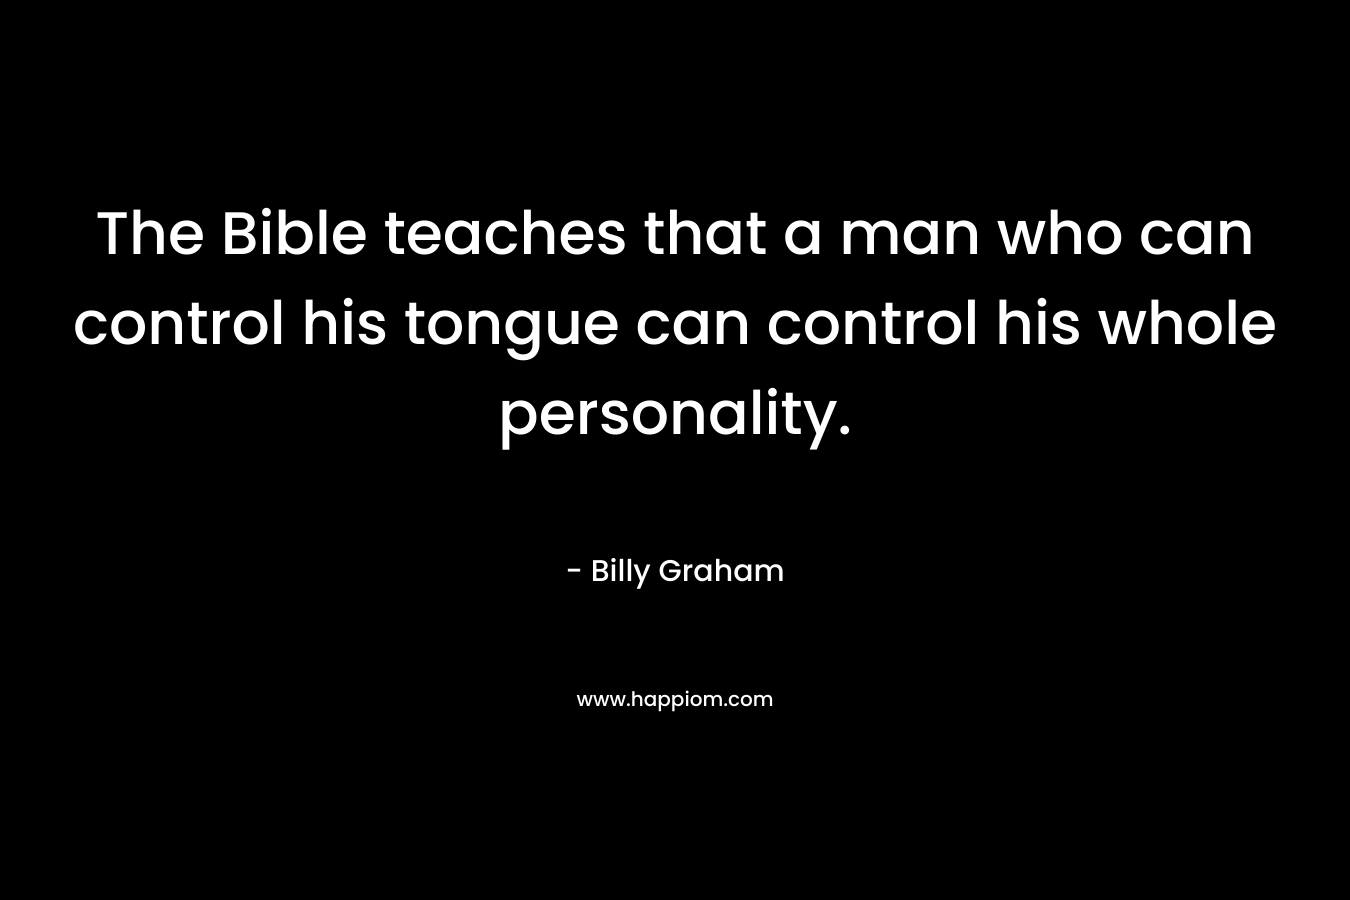 The Bible teaches that a man who can control his tongue can control his whole personality.